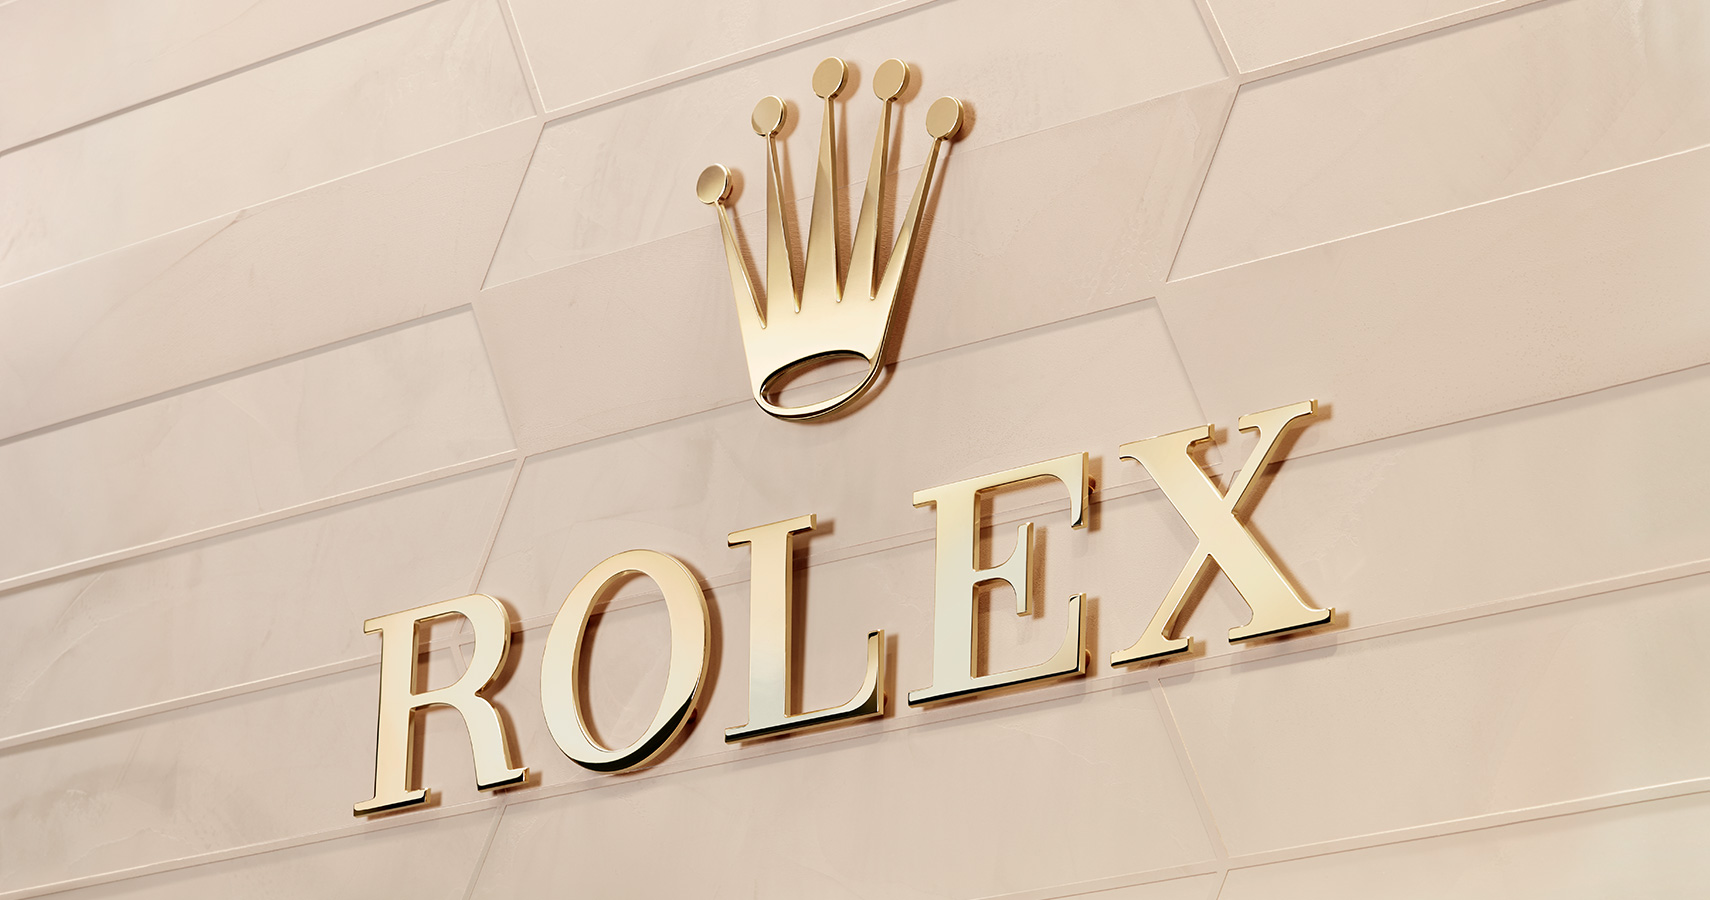 La Mine dOr, as an Official Rolex Retailer, we are one of the only retailers allowed to sell Rolex watches.